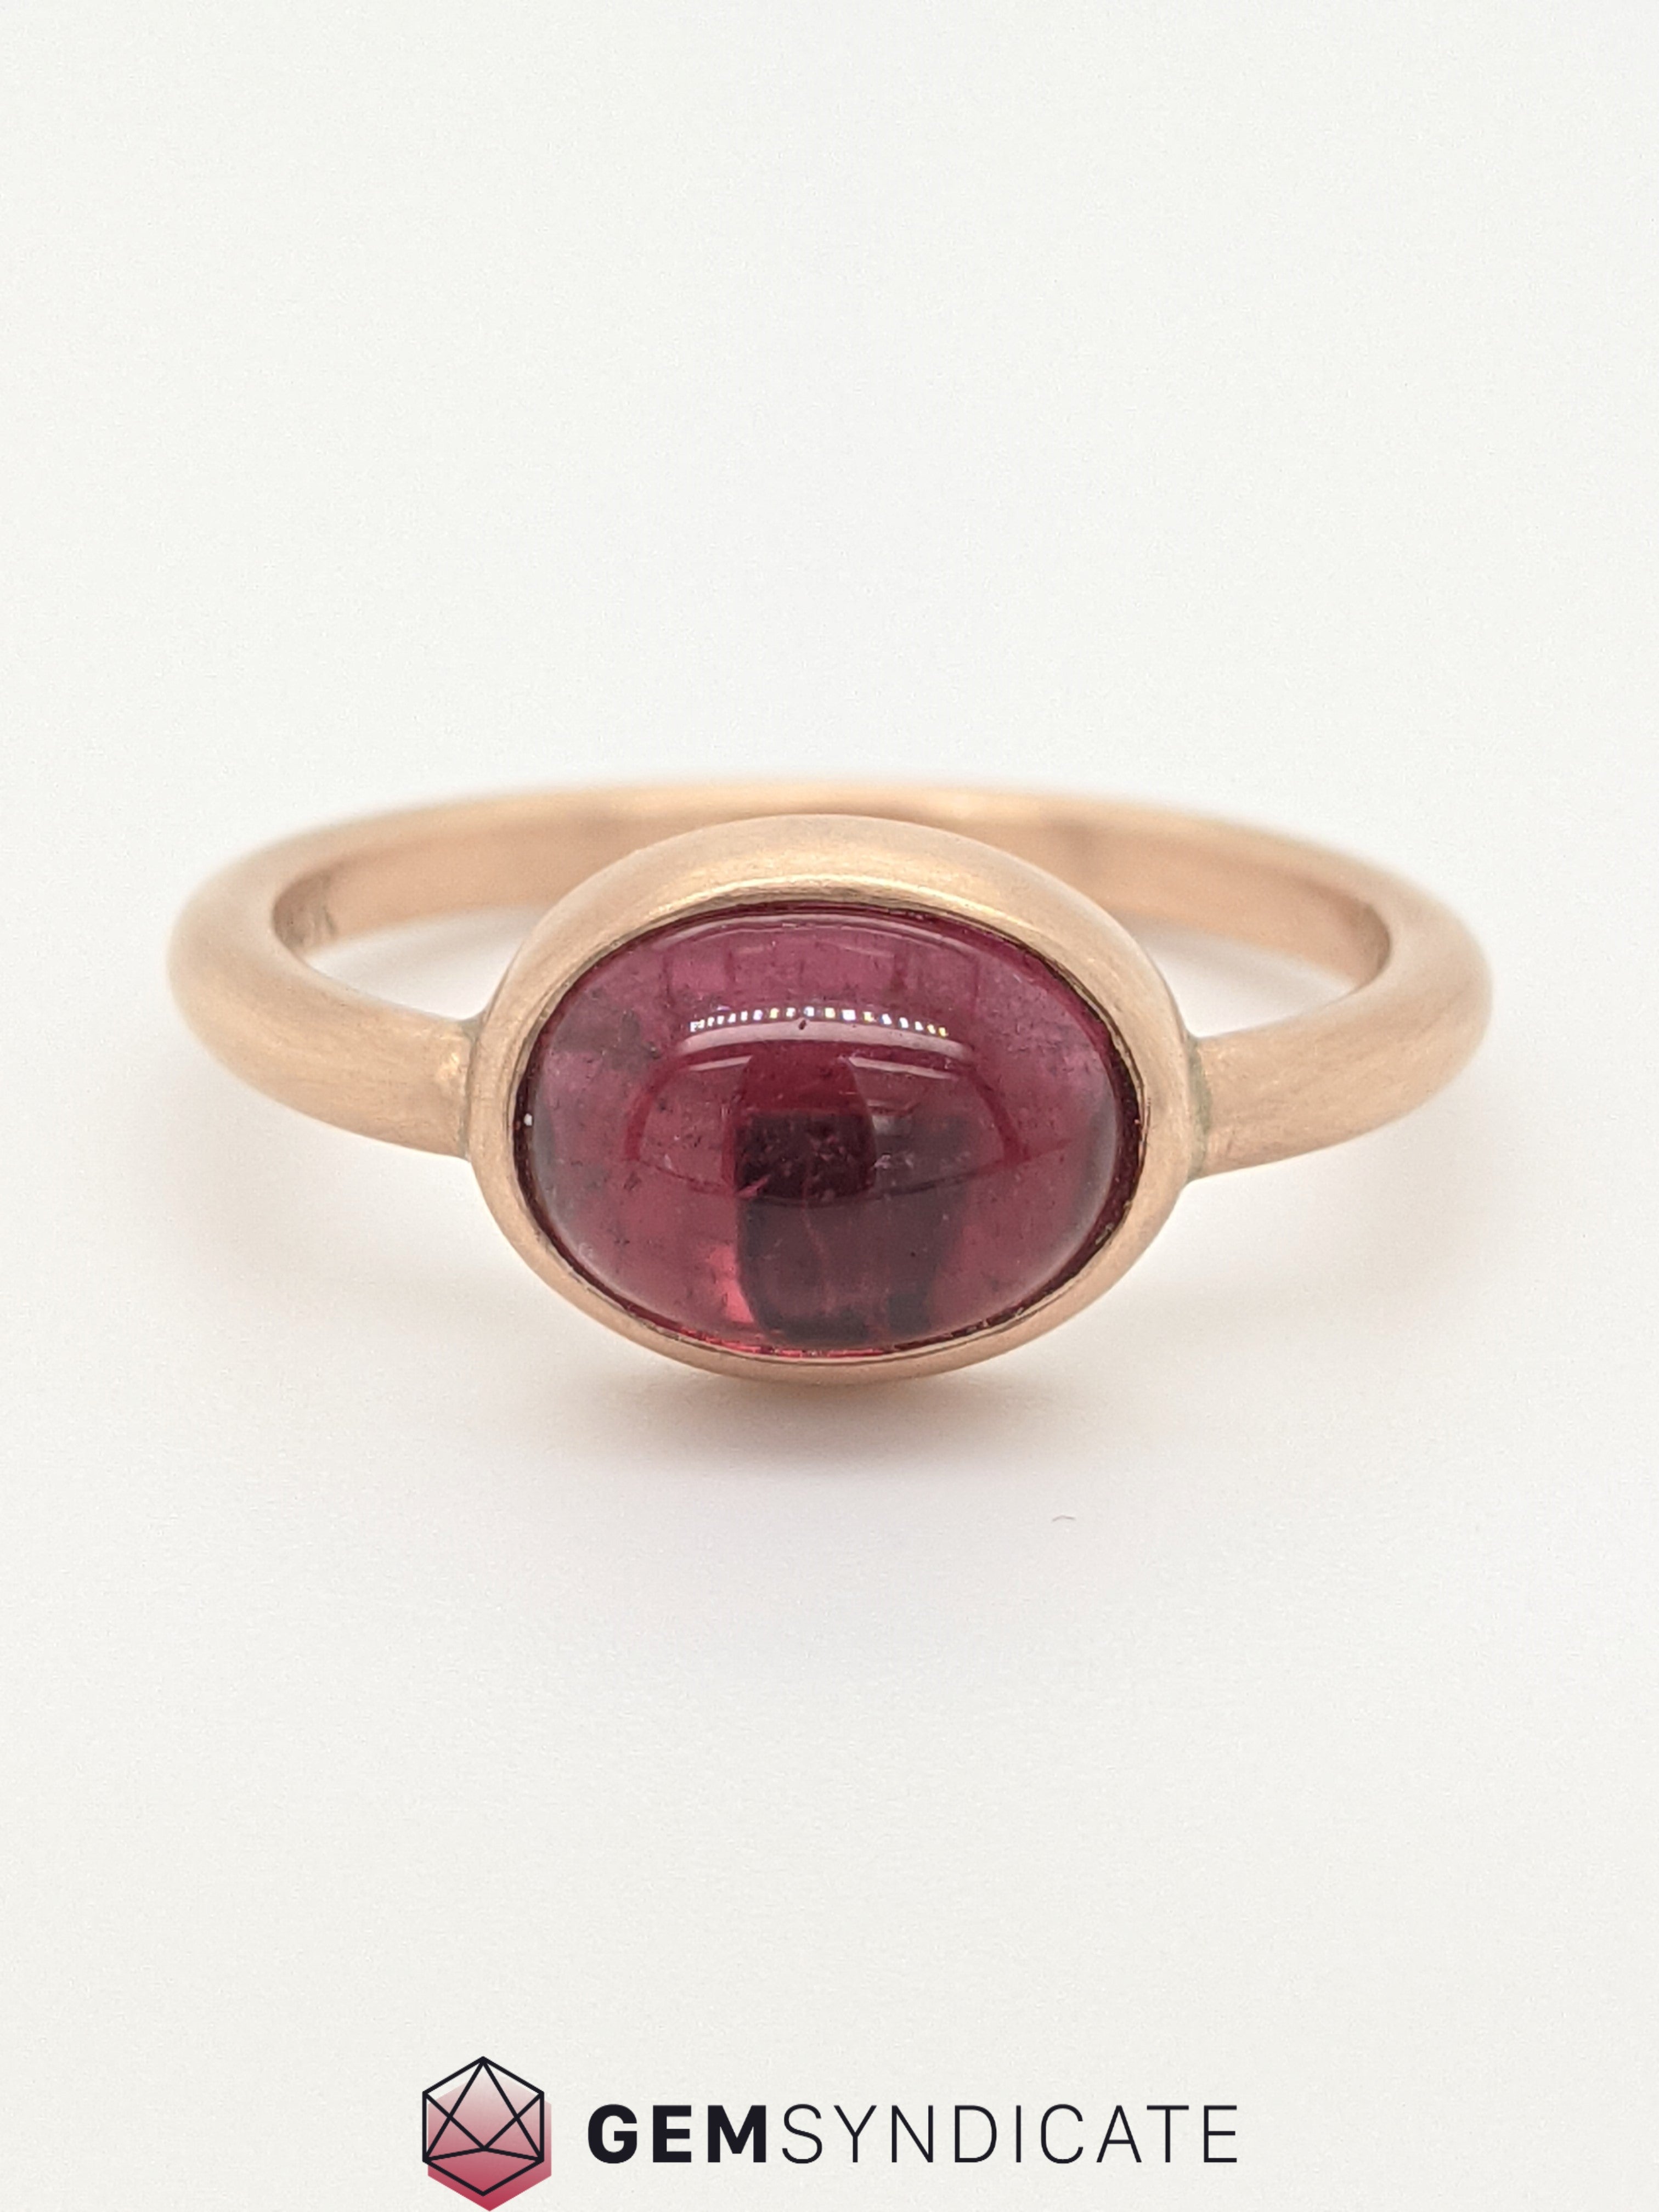 Regal Pink Tourmaline Solitaire Ring